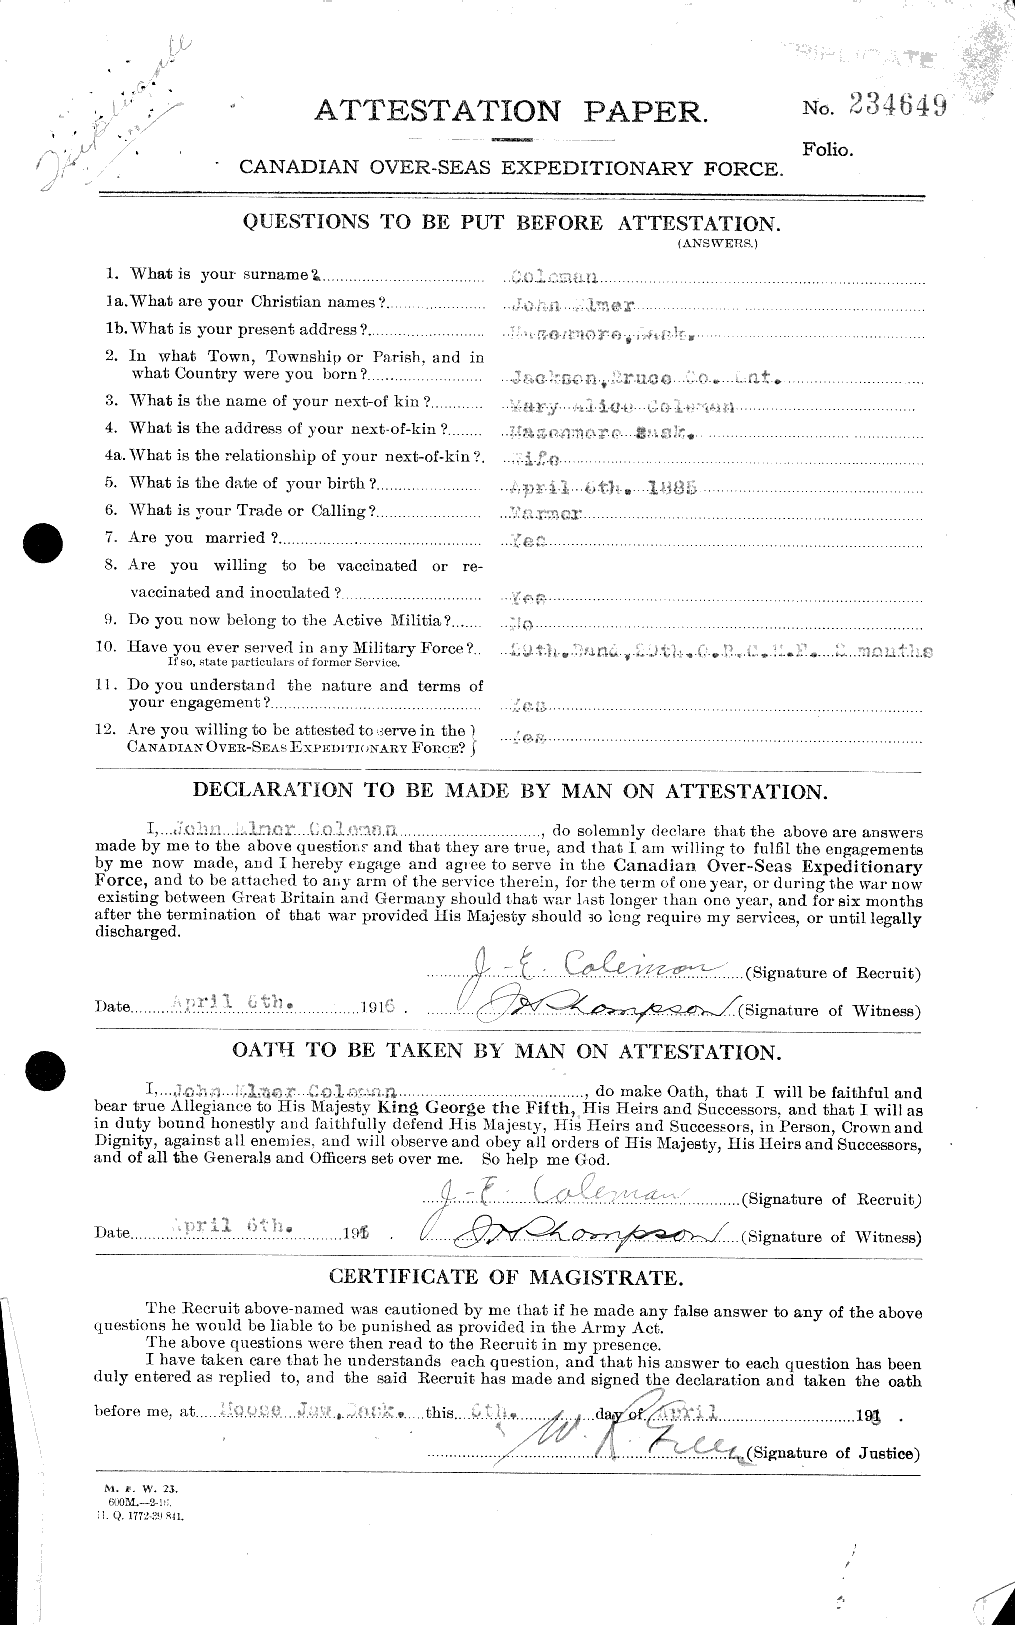 Personnel Records of the First World War - CEF 028209a